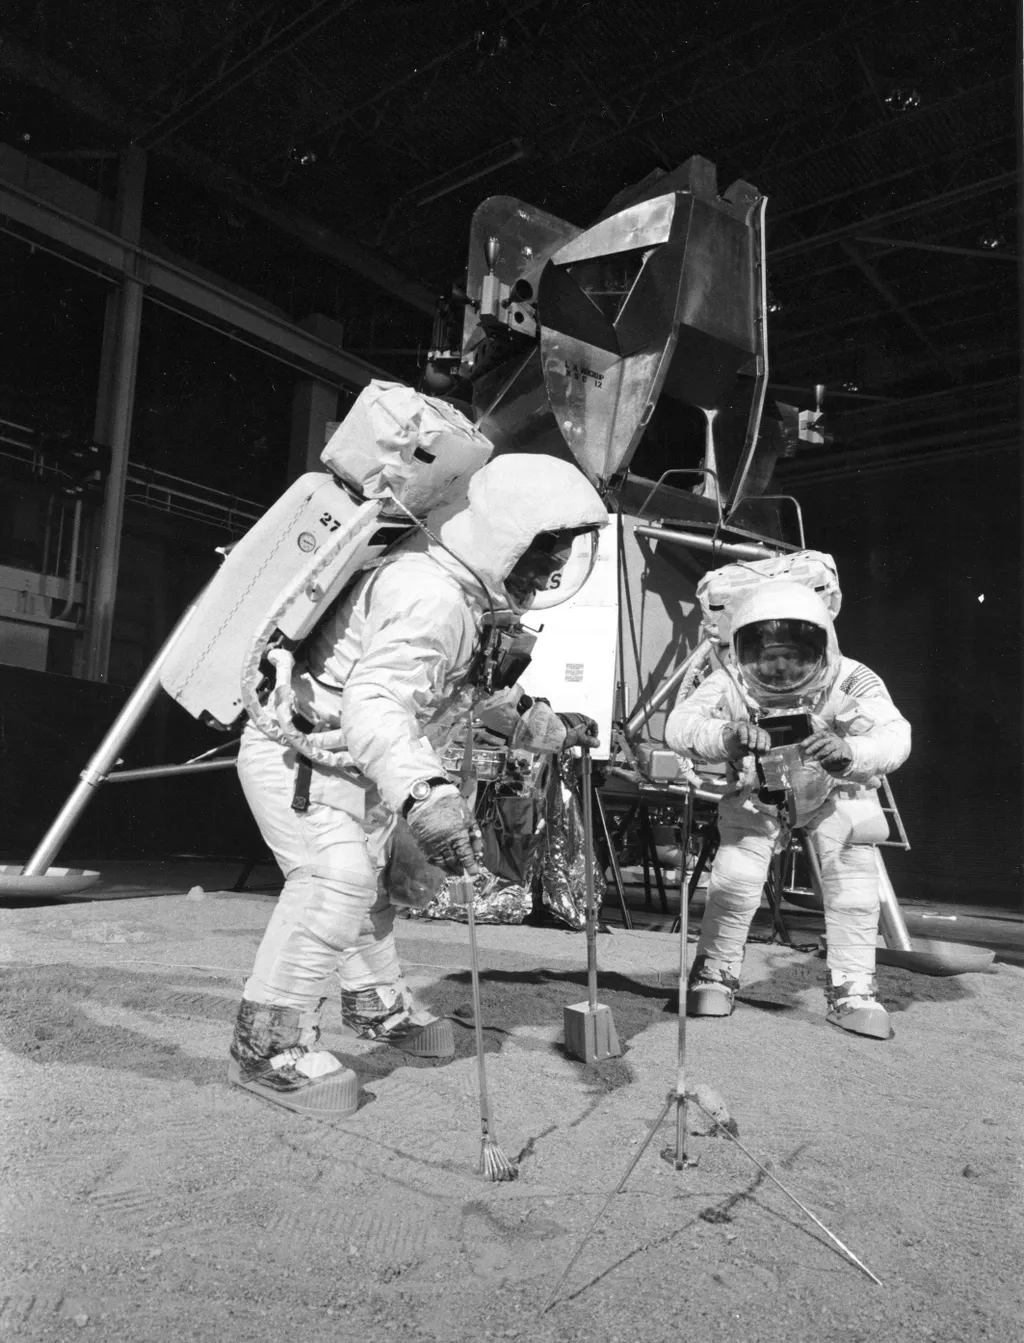 Apollo 11 Buzz Aldrin Lunar Module Training Neil Armstrong Two members of the Apollo 11 lunar landing mission participate in a simulation of deploying and using lunar tools on the surface of the Moon during a training exercise on April 22, 1969. Astronaut